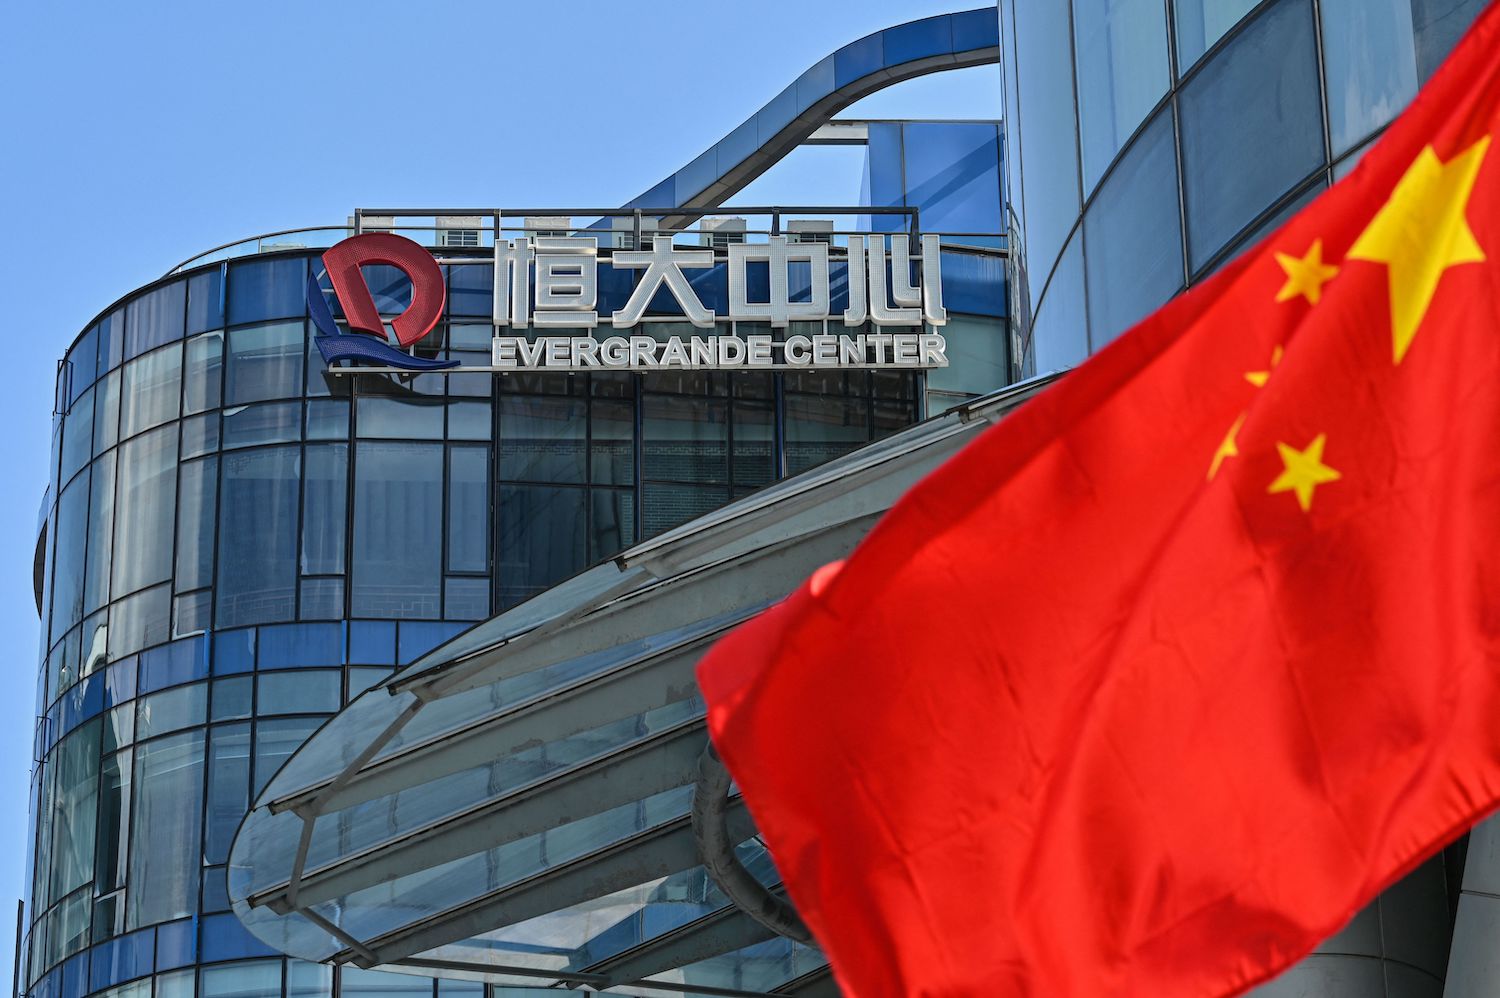 Evergrande and China – Will it Escalate to an Economic Crisis?